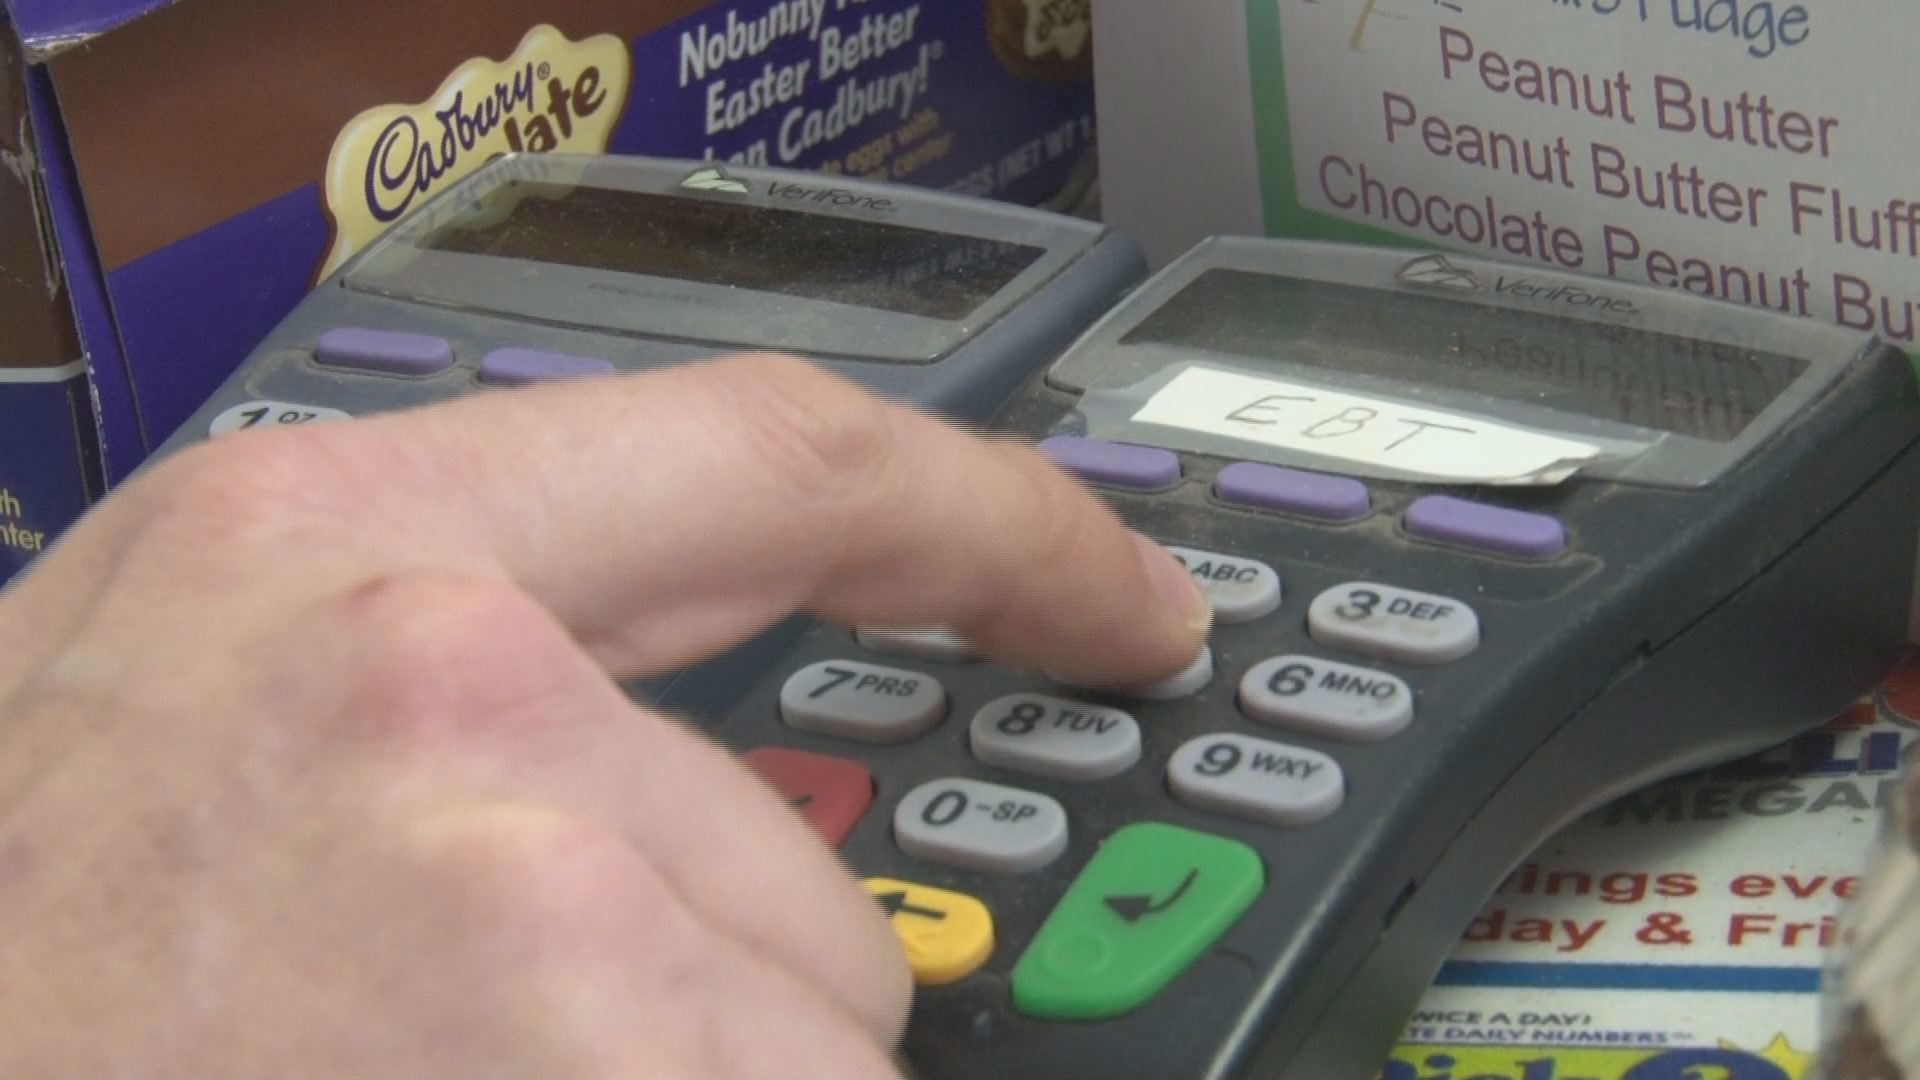 Maine ends use of photos on EBT cards, effective immediately